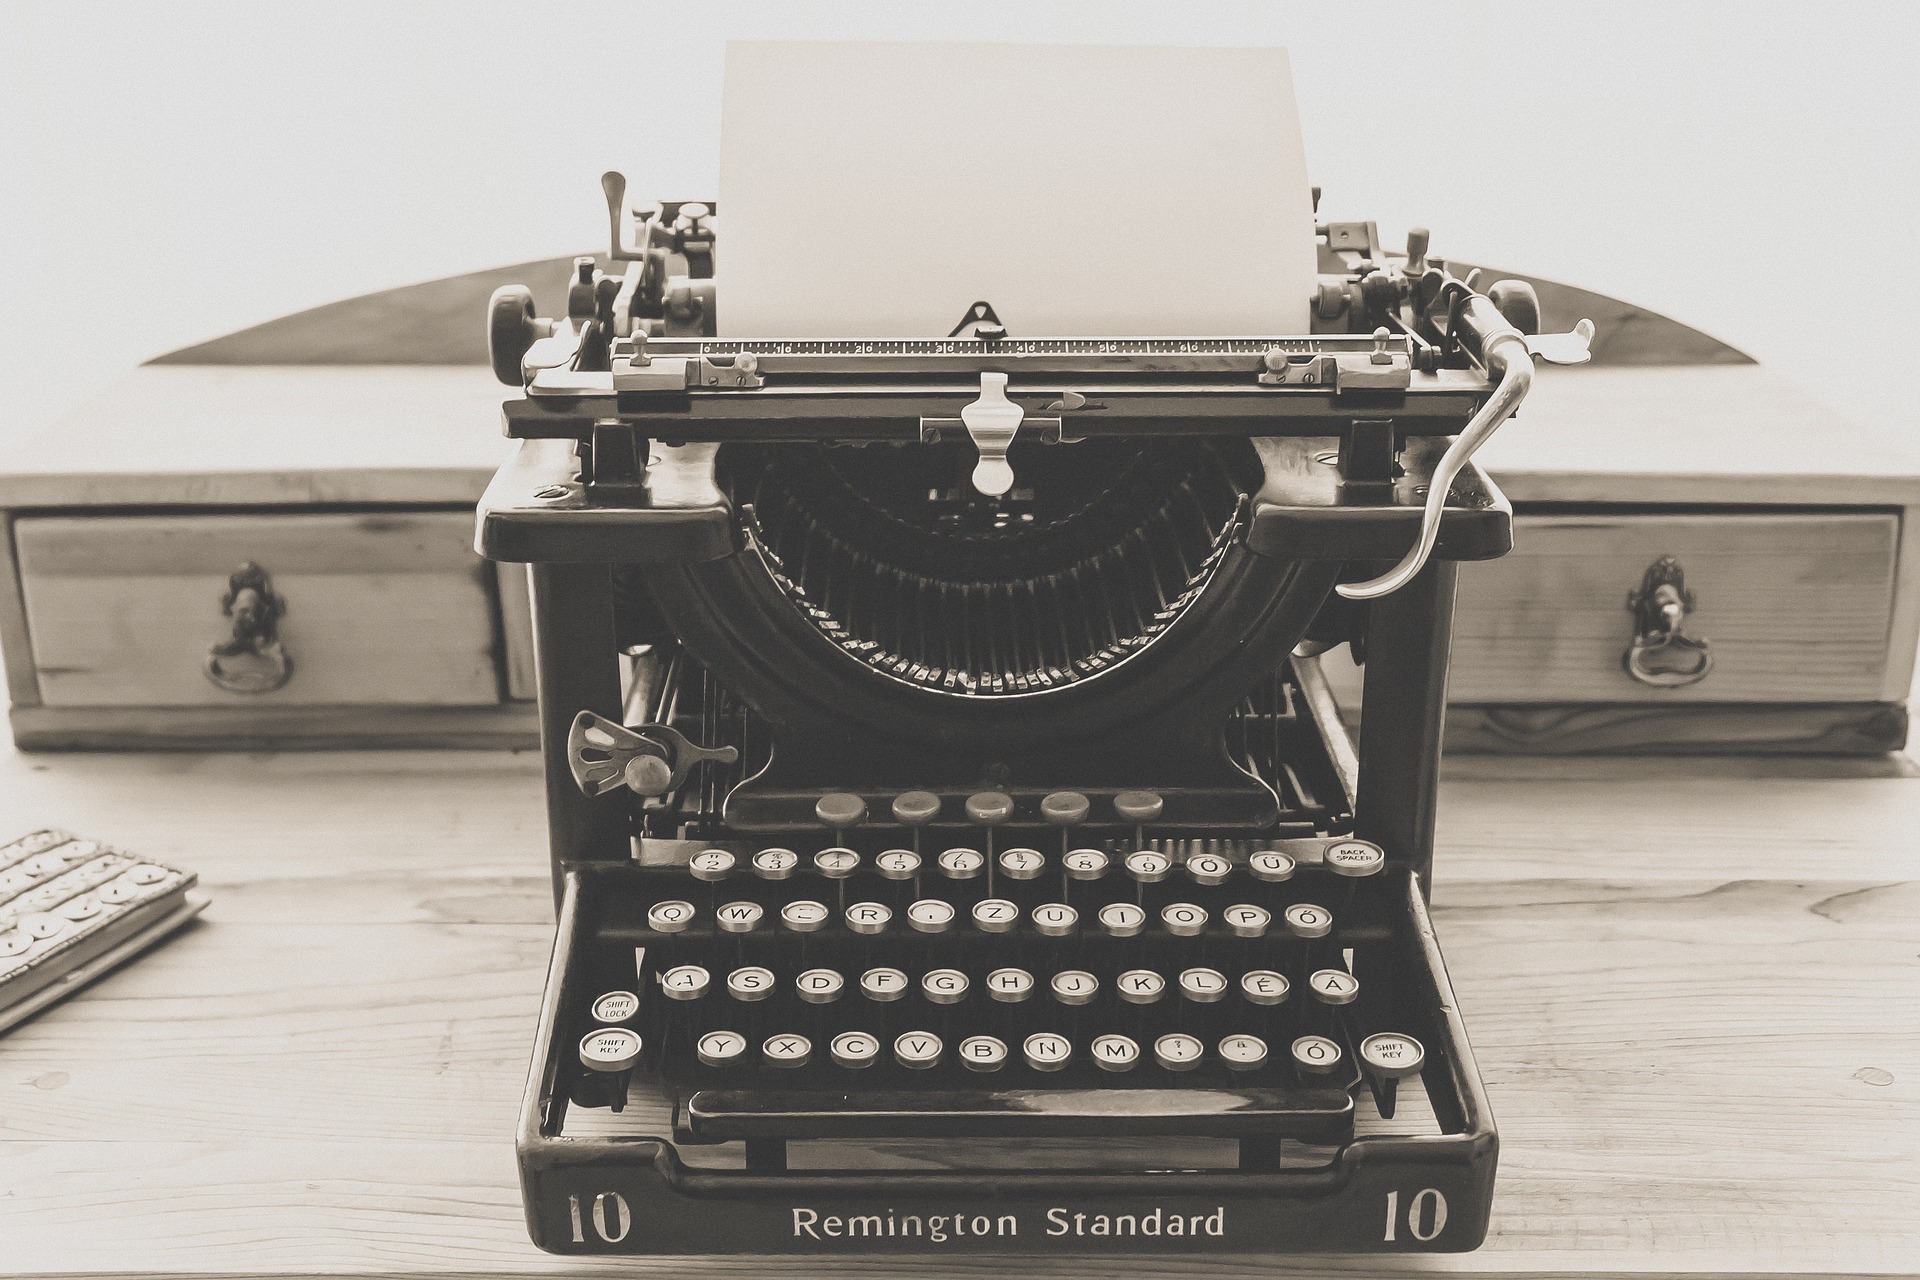 Old Remington typewriter with blank piece of paper in it, waiting for your eager fingers to start typing.